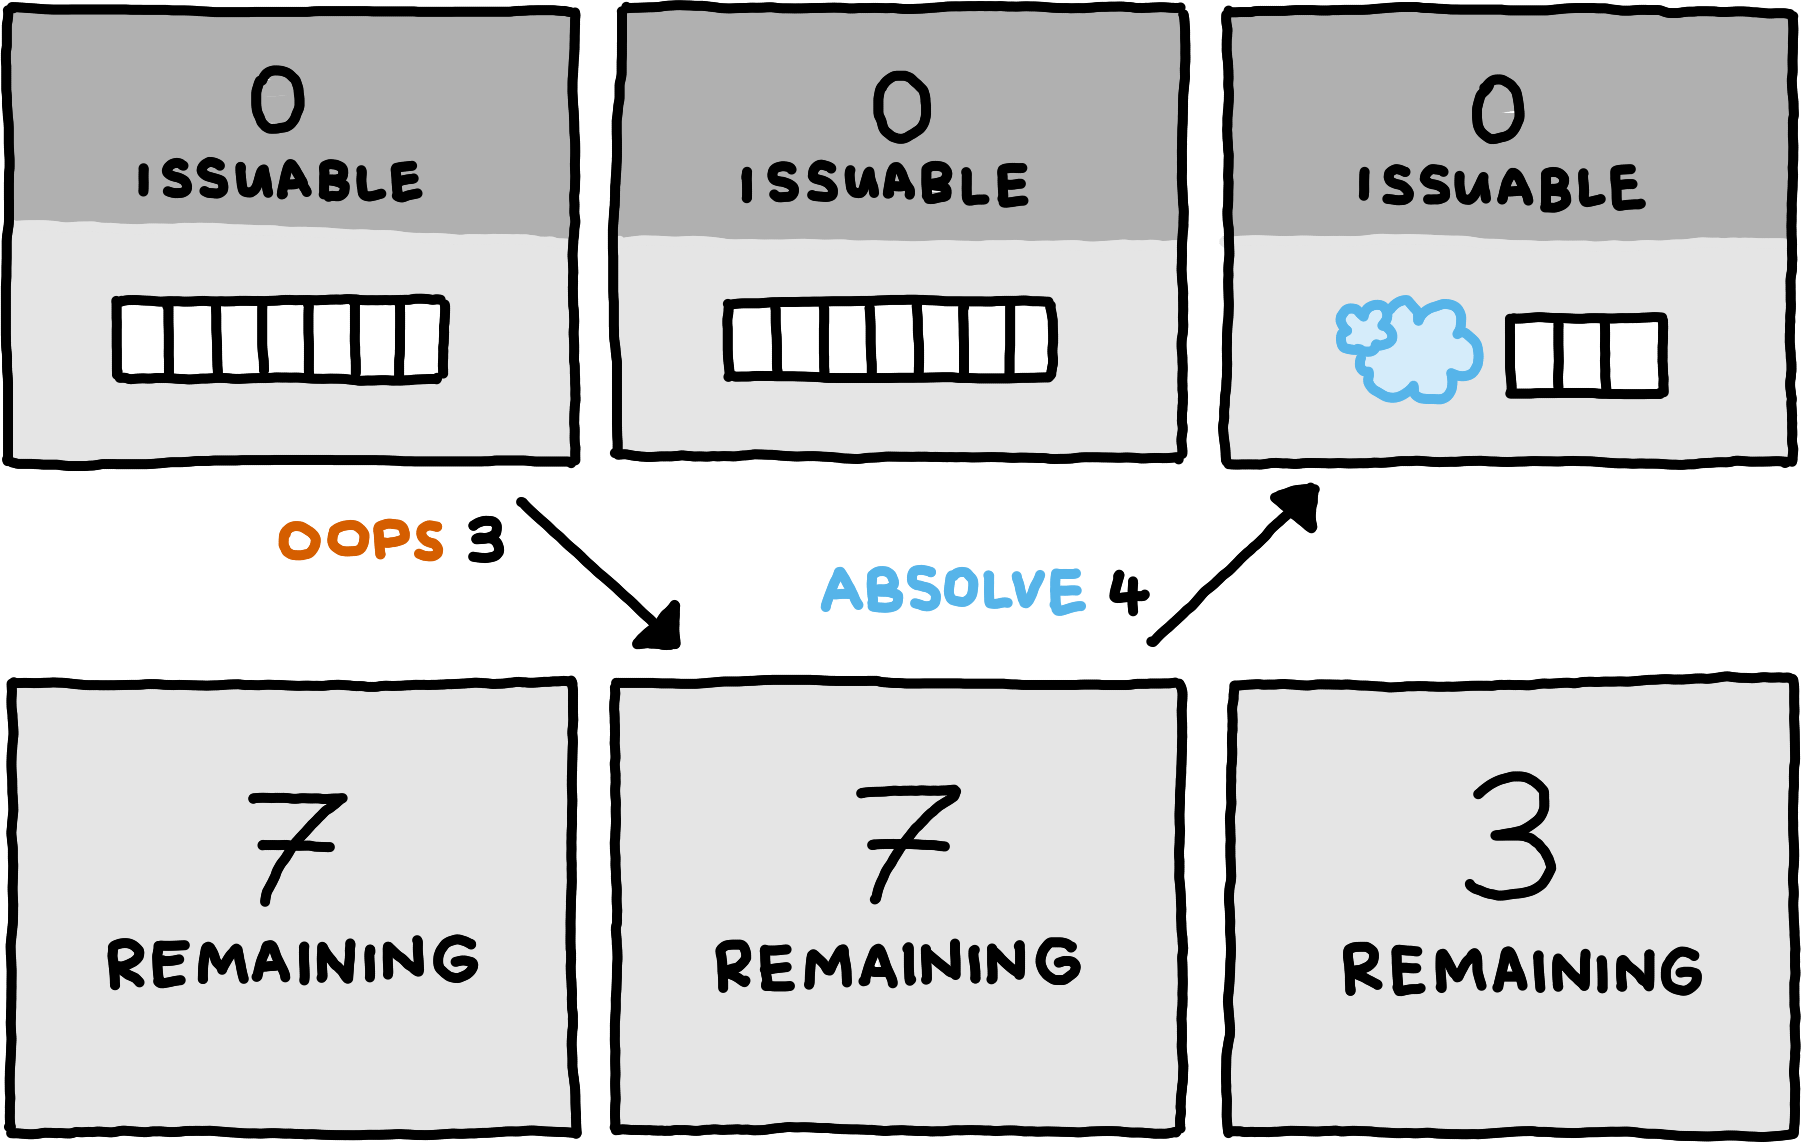 A server-client diagram. The server starts with seven empty buffer slots and zero issuable guarantees; the client starts with seven remaining guarantees. In the first step, the server asks for absolution down to a number of three remaining guarantees. When the client receives the request, it answers by absolving four guarantees, and reduces its remaining guarantees by four down to three. The server receives the absolution and then shrinks its buffer by four slots down to three.